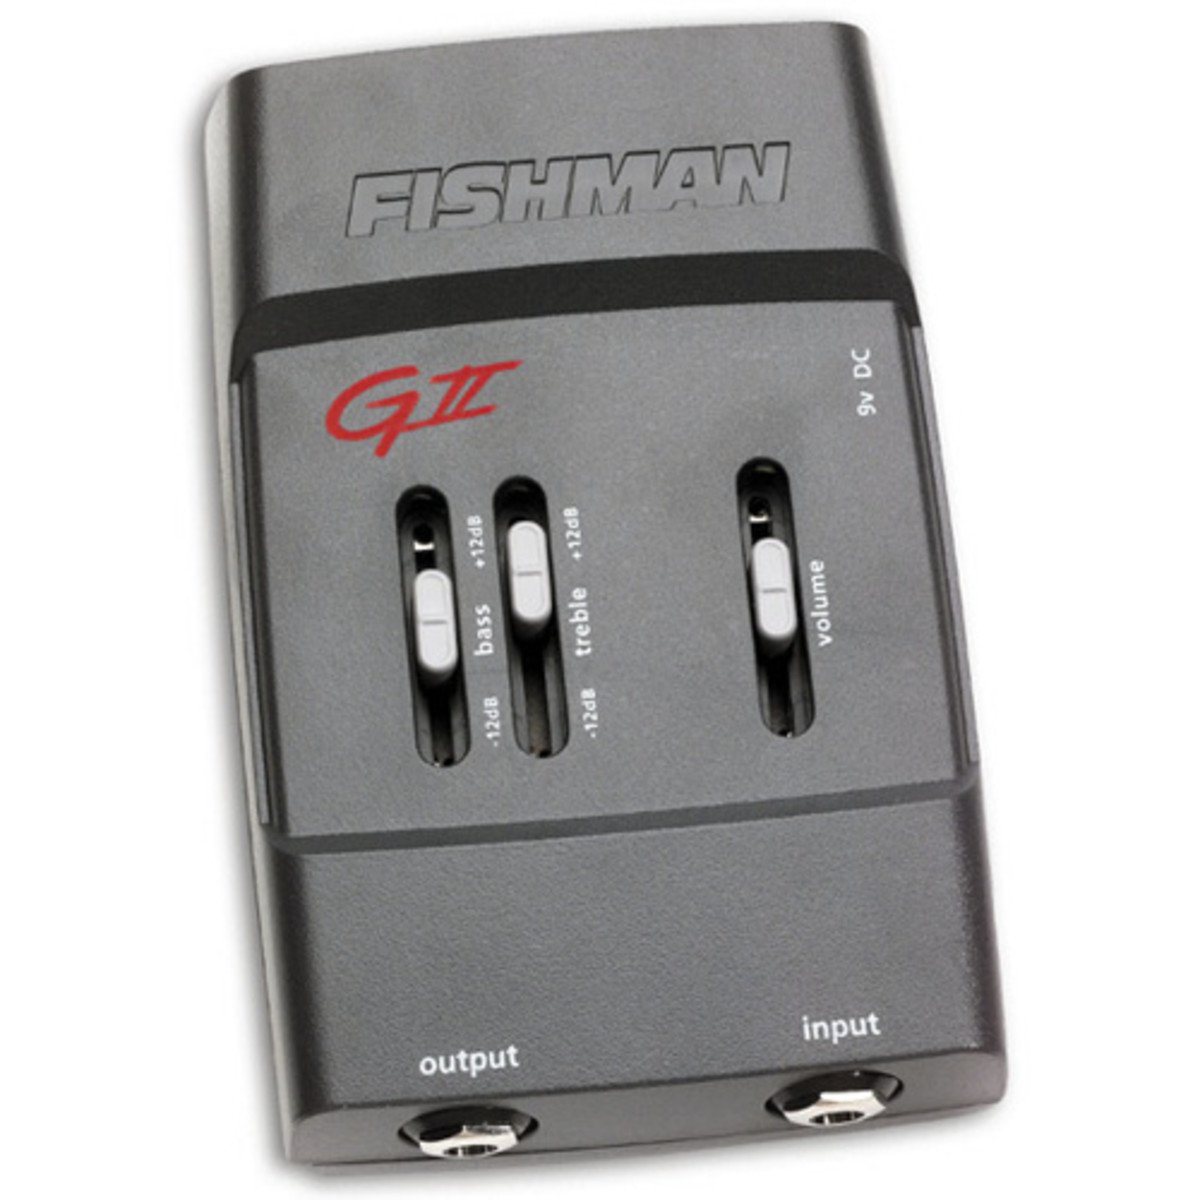 FISHMAN GII Acoustic Instrument Preamp